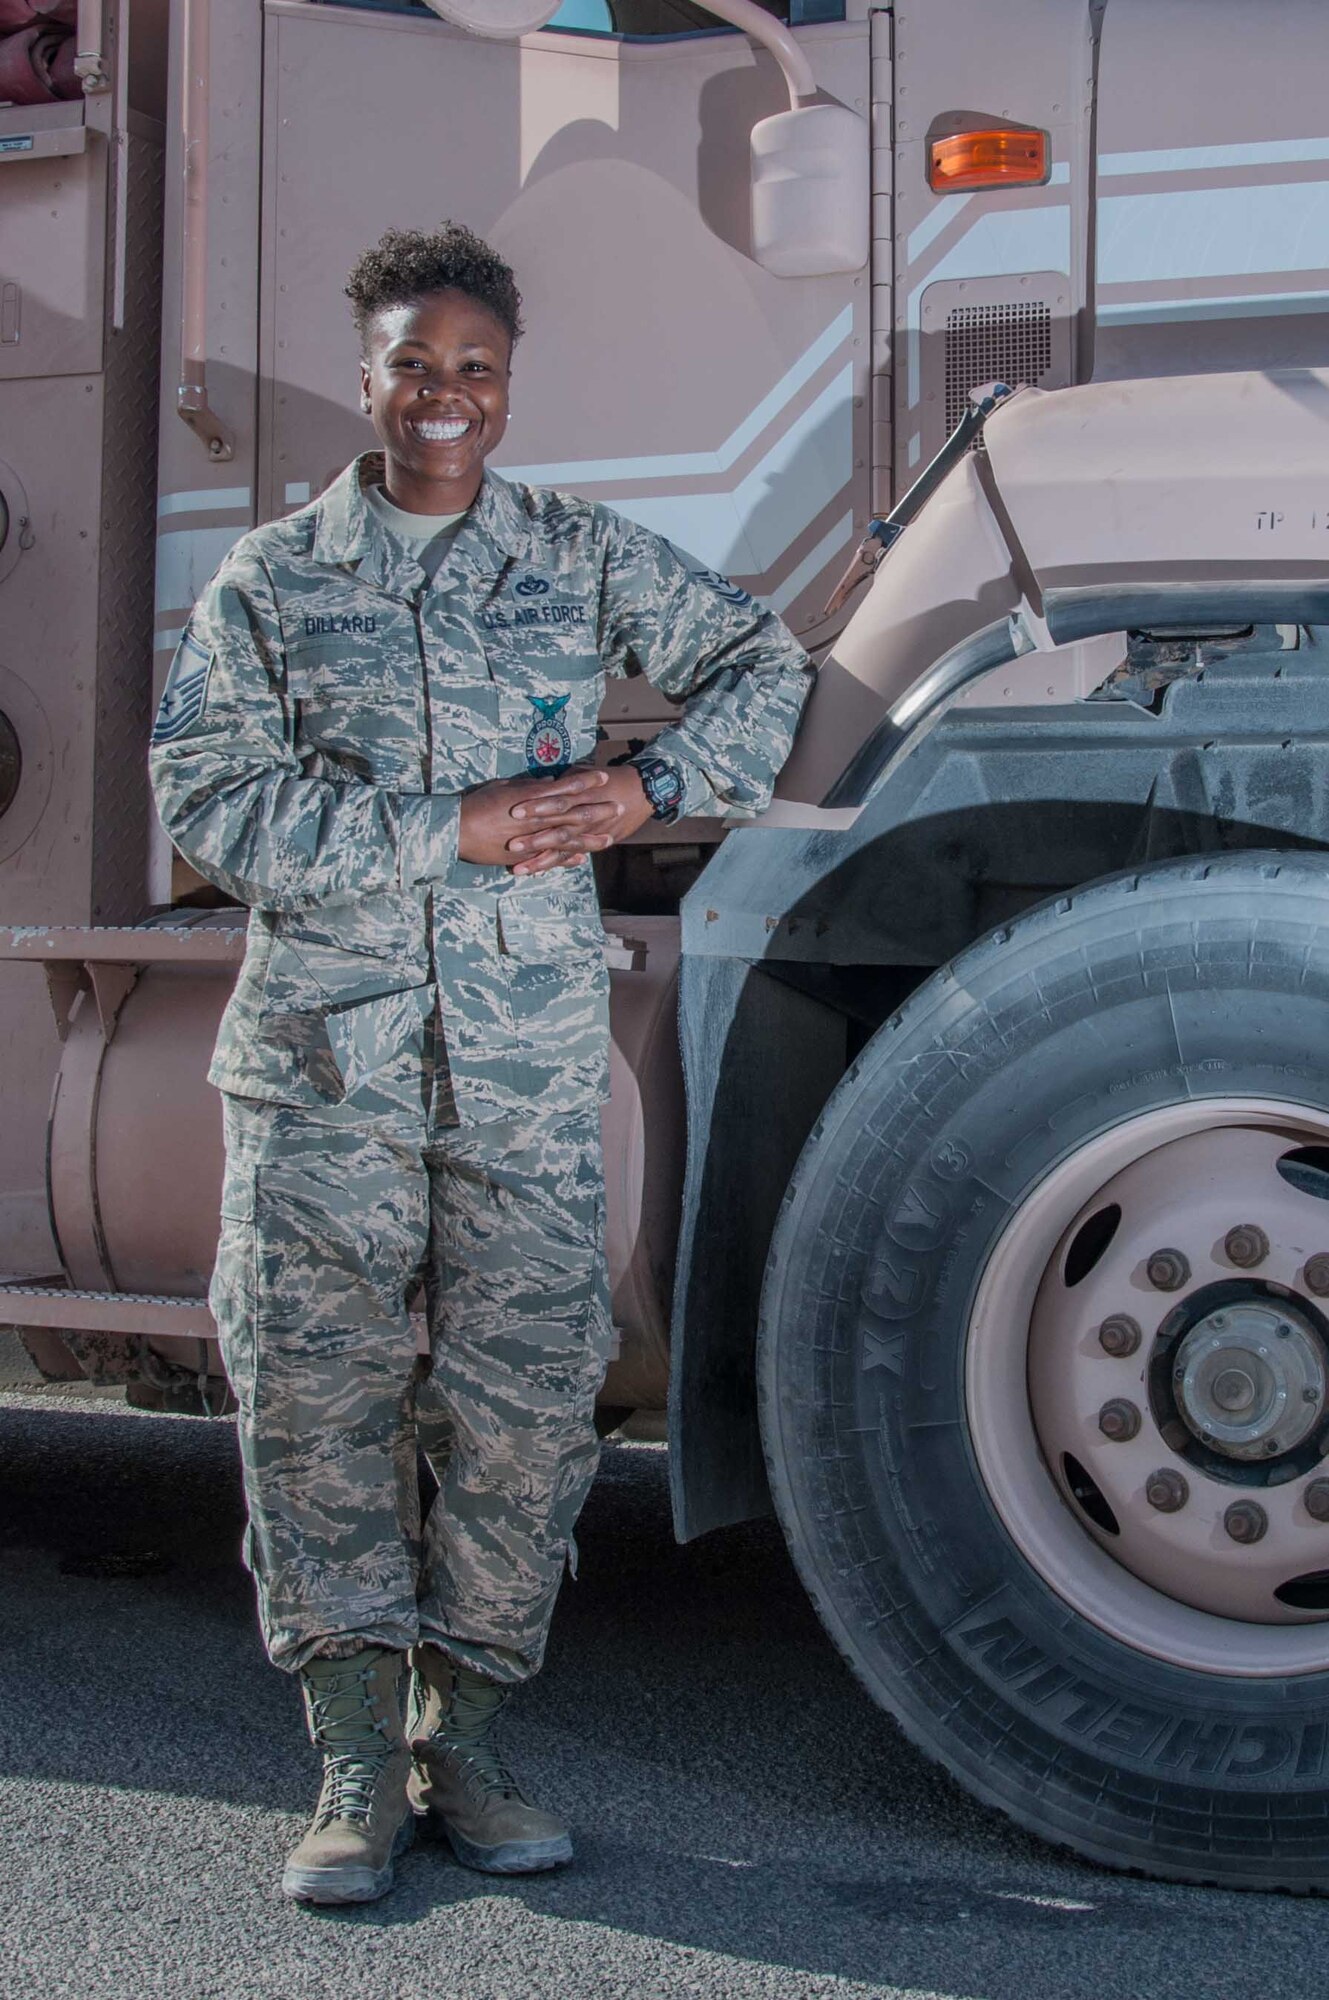 Master Sgt. Mendy Dillard poses for a portrait beside a fire truck at an undisclosed location in Southwest Asia Wednesday, 11 October 2017. Dillard is celebrating her 11th year serving the Air Force as a firefighter. (U.S. Air Force photo by Master Sgt. Eric M. Sharman)